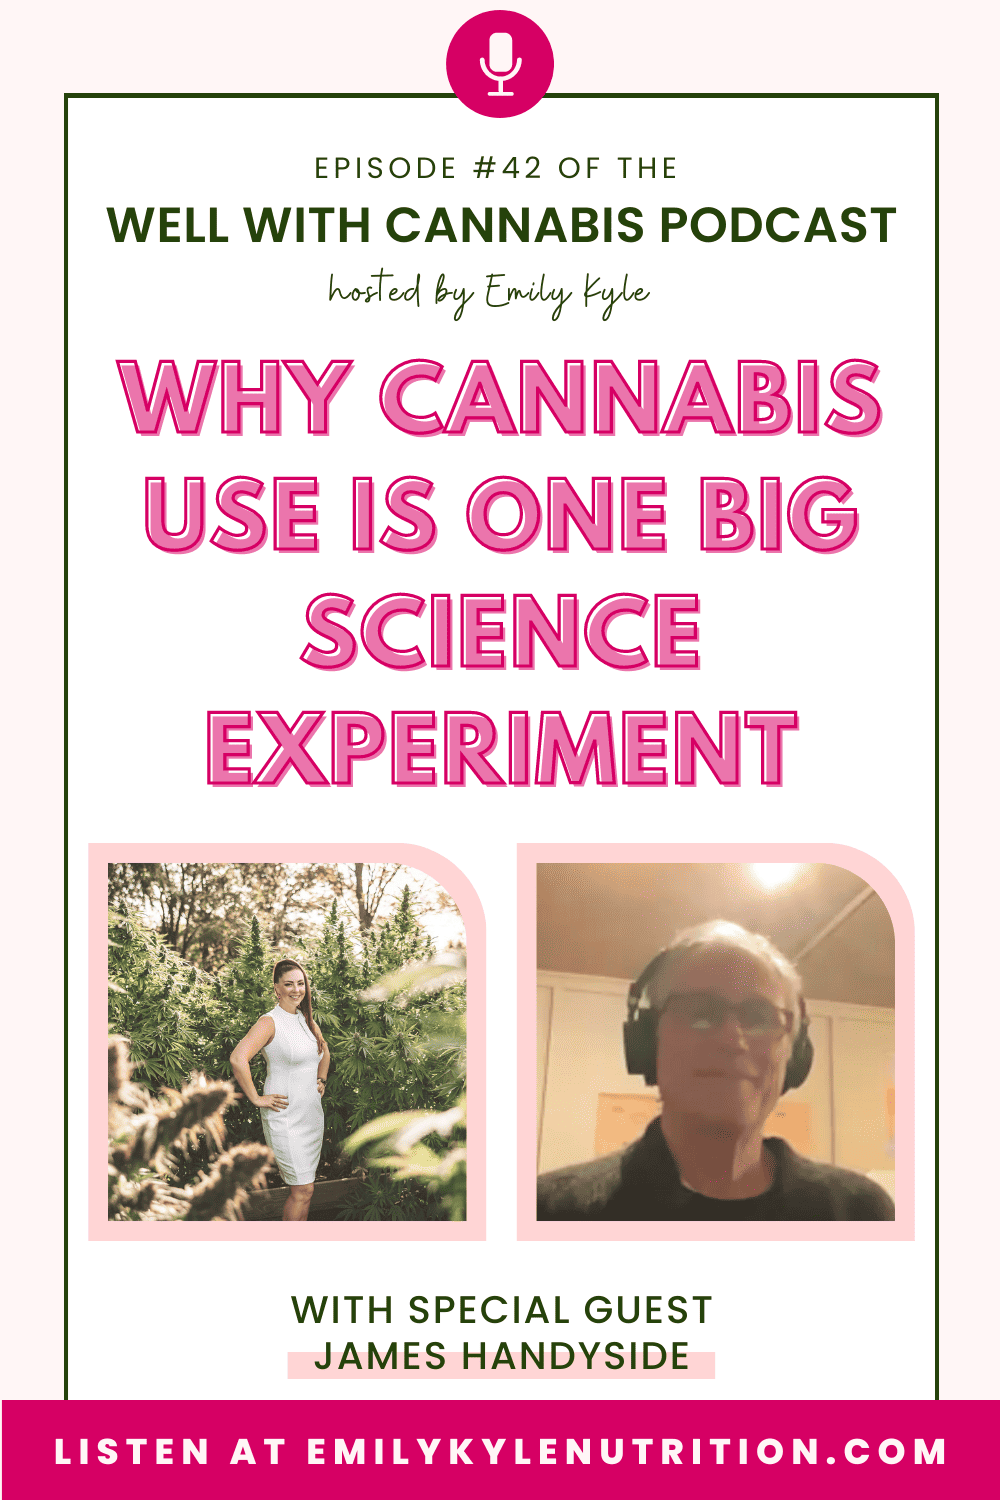 A picture of James Handyside, a guest on the Well With Cannabis podcast.